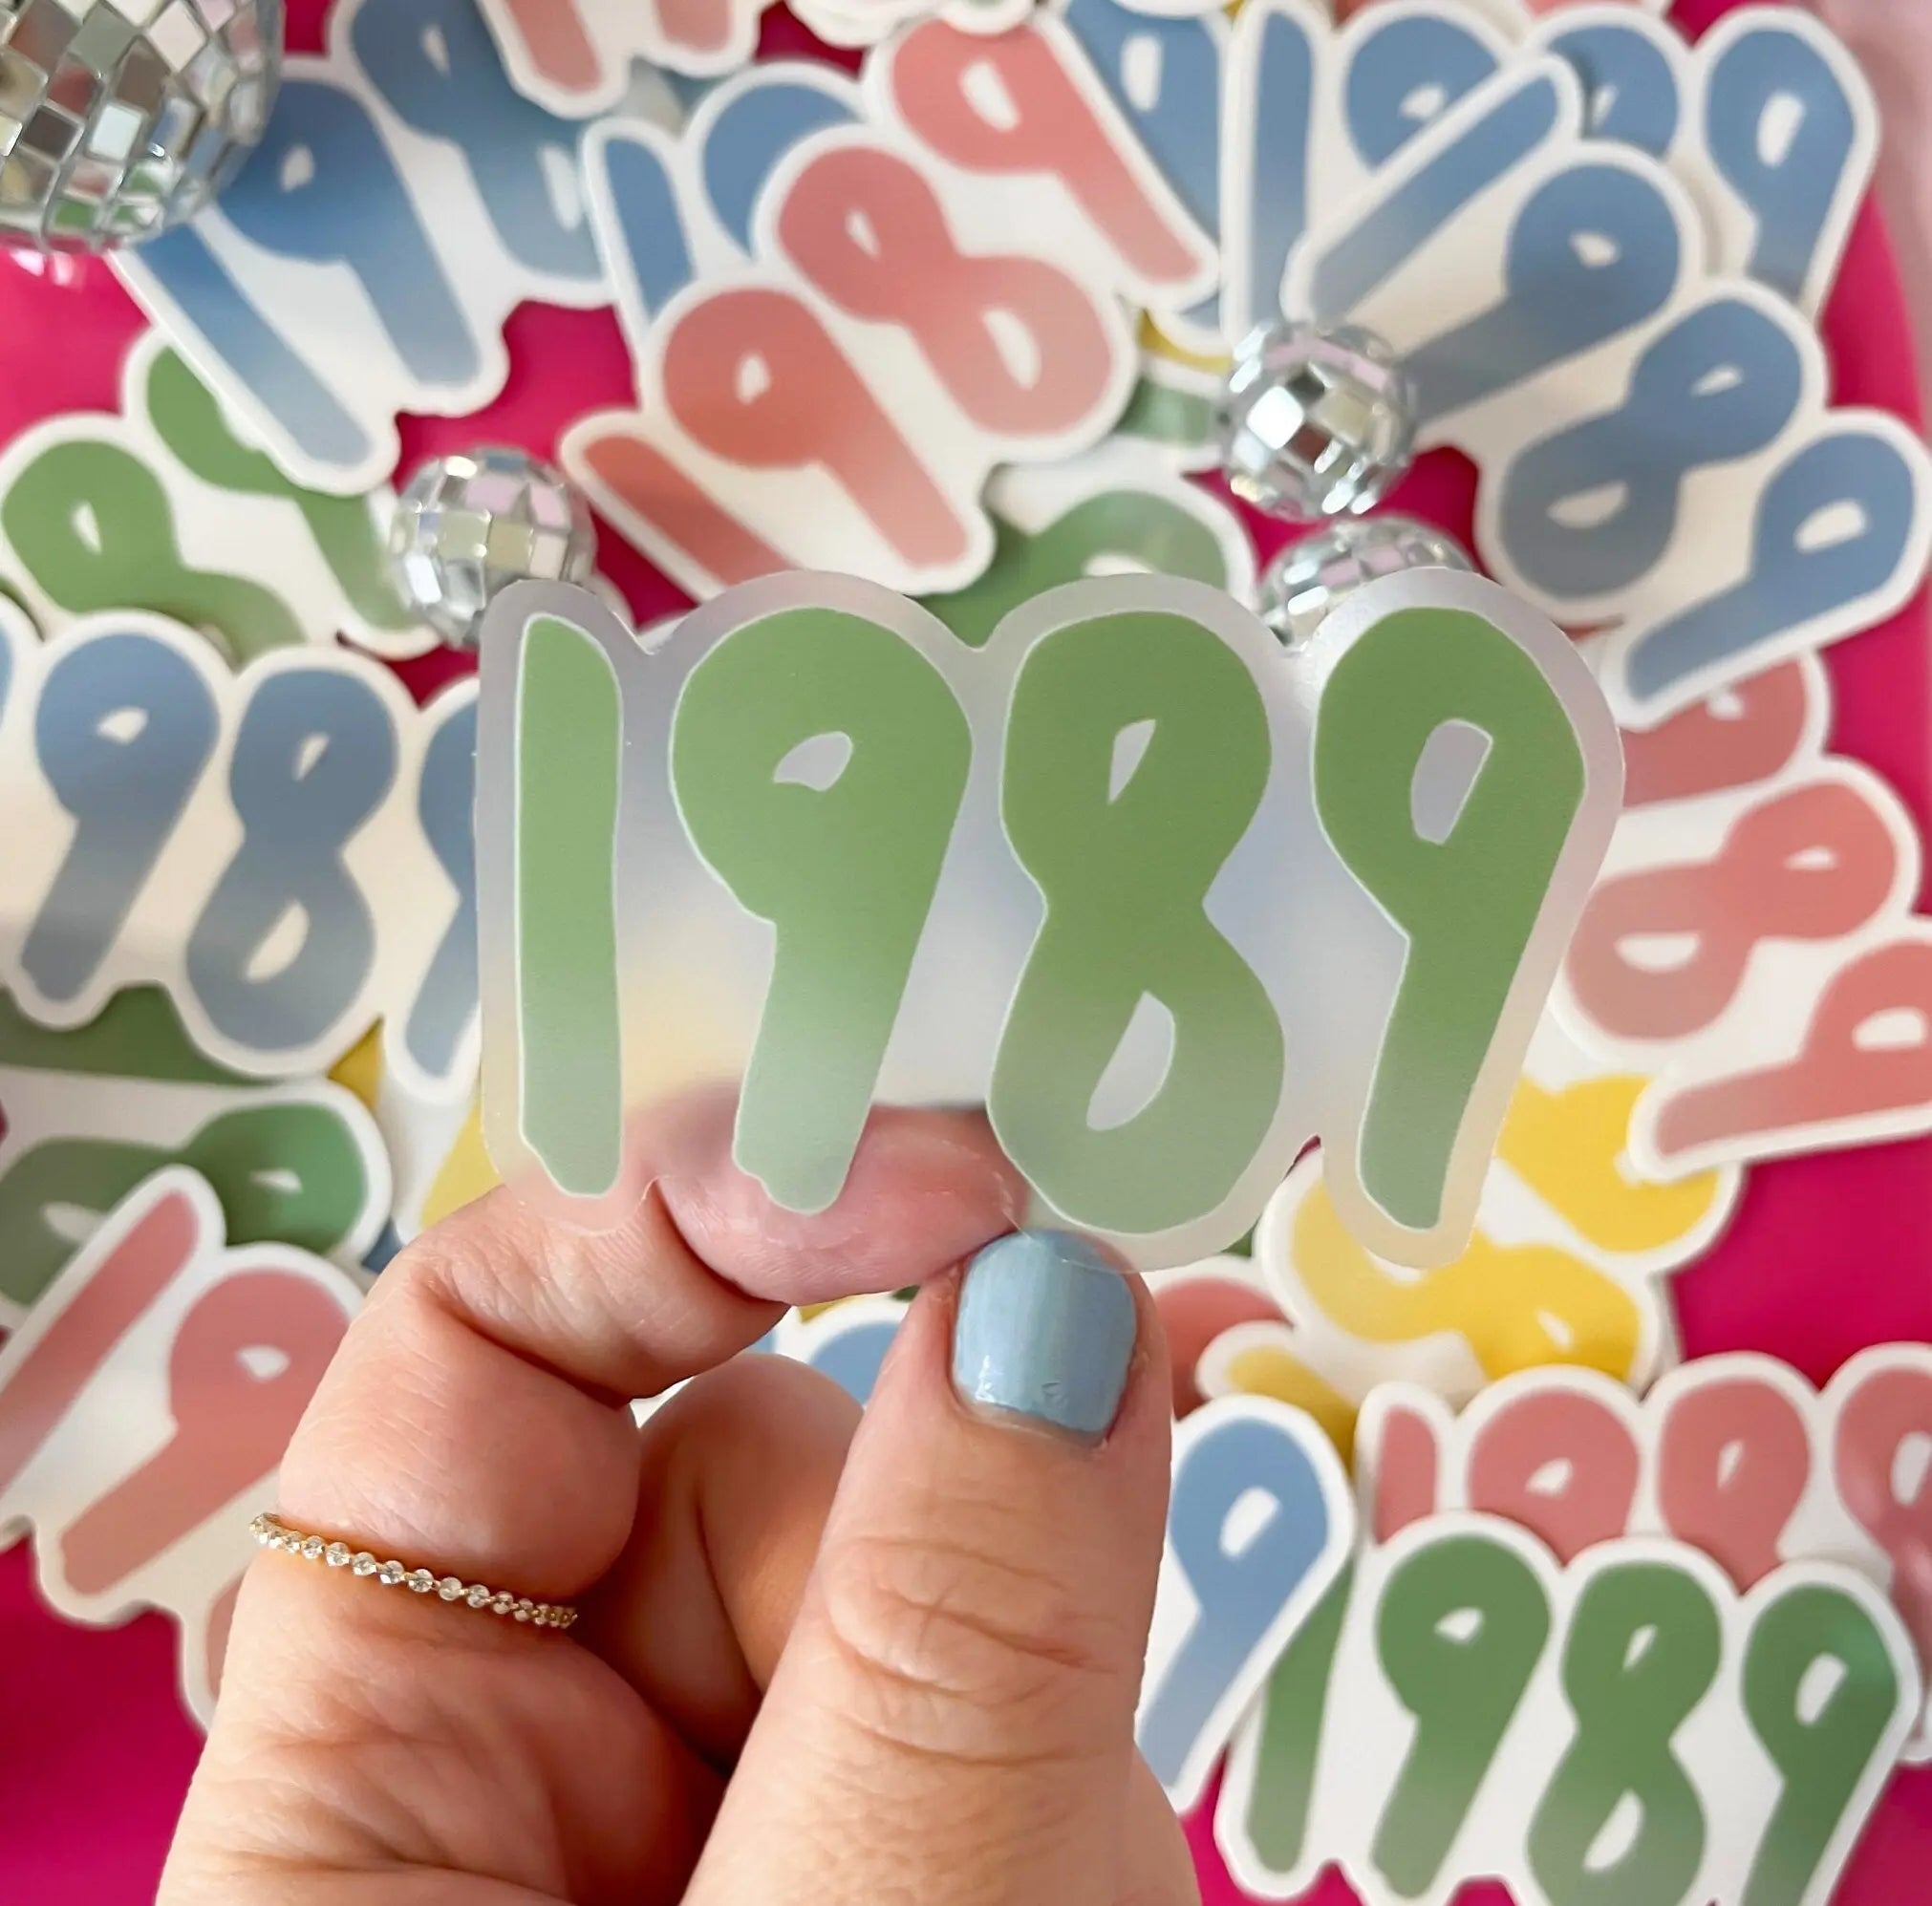 CLEAR 1989 sticker - green MangoIllustrated